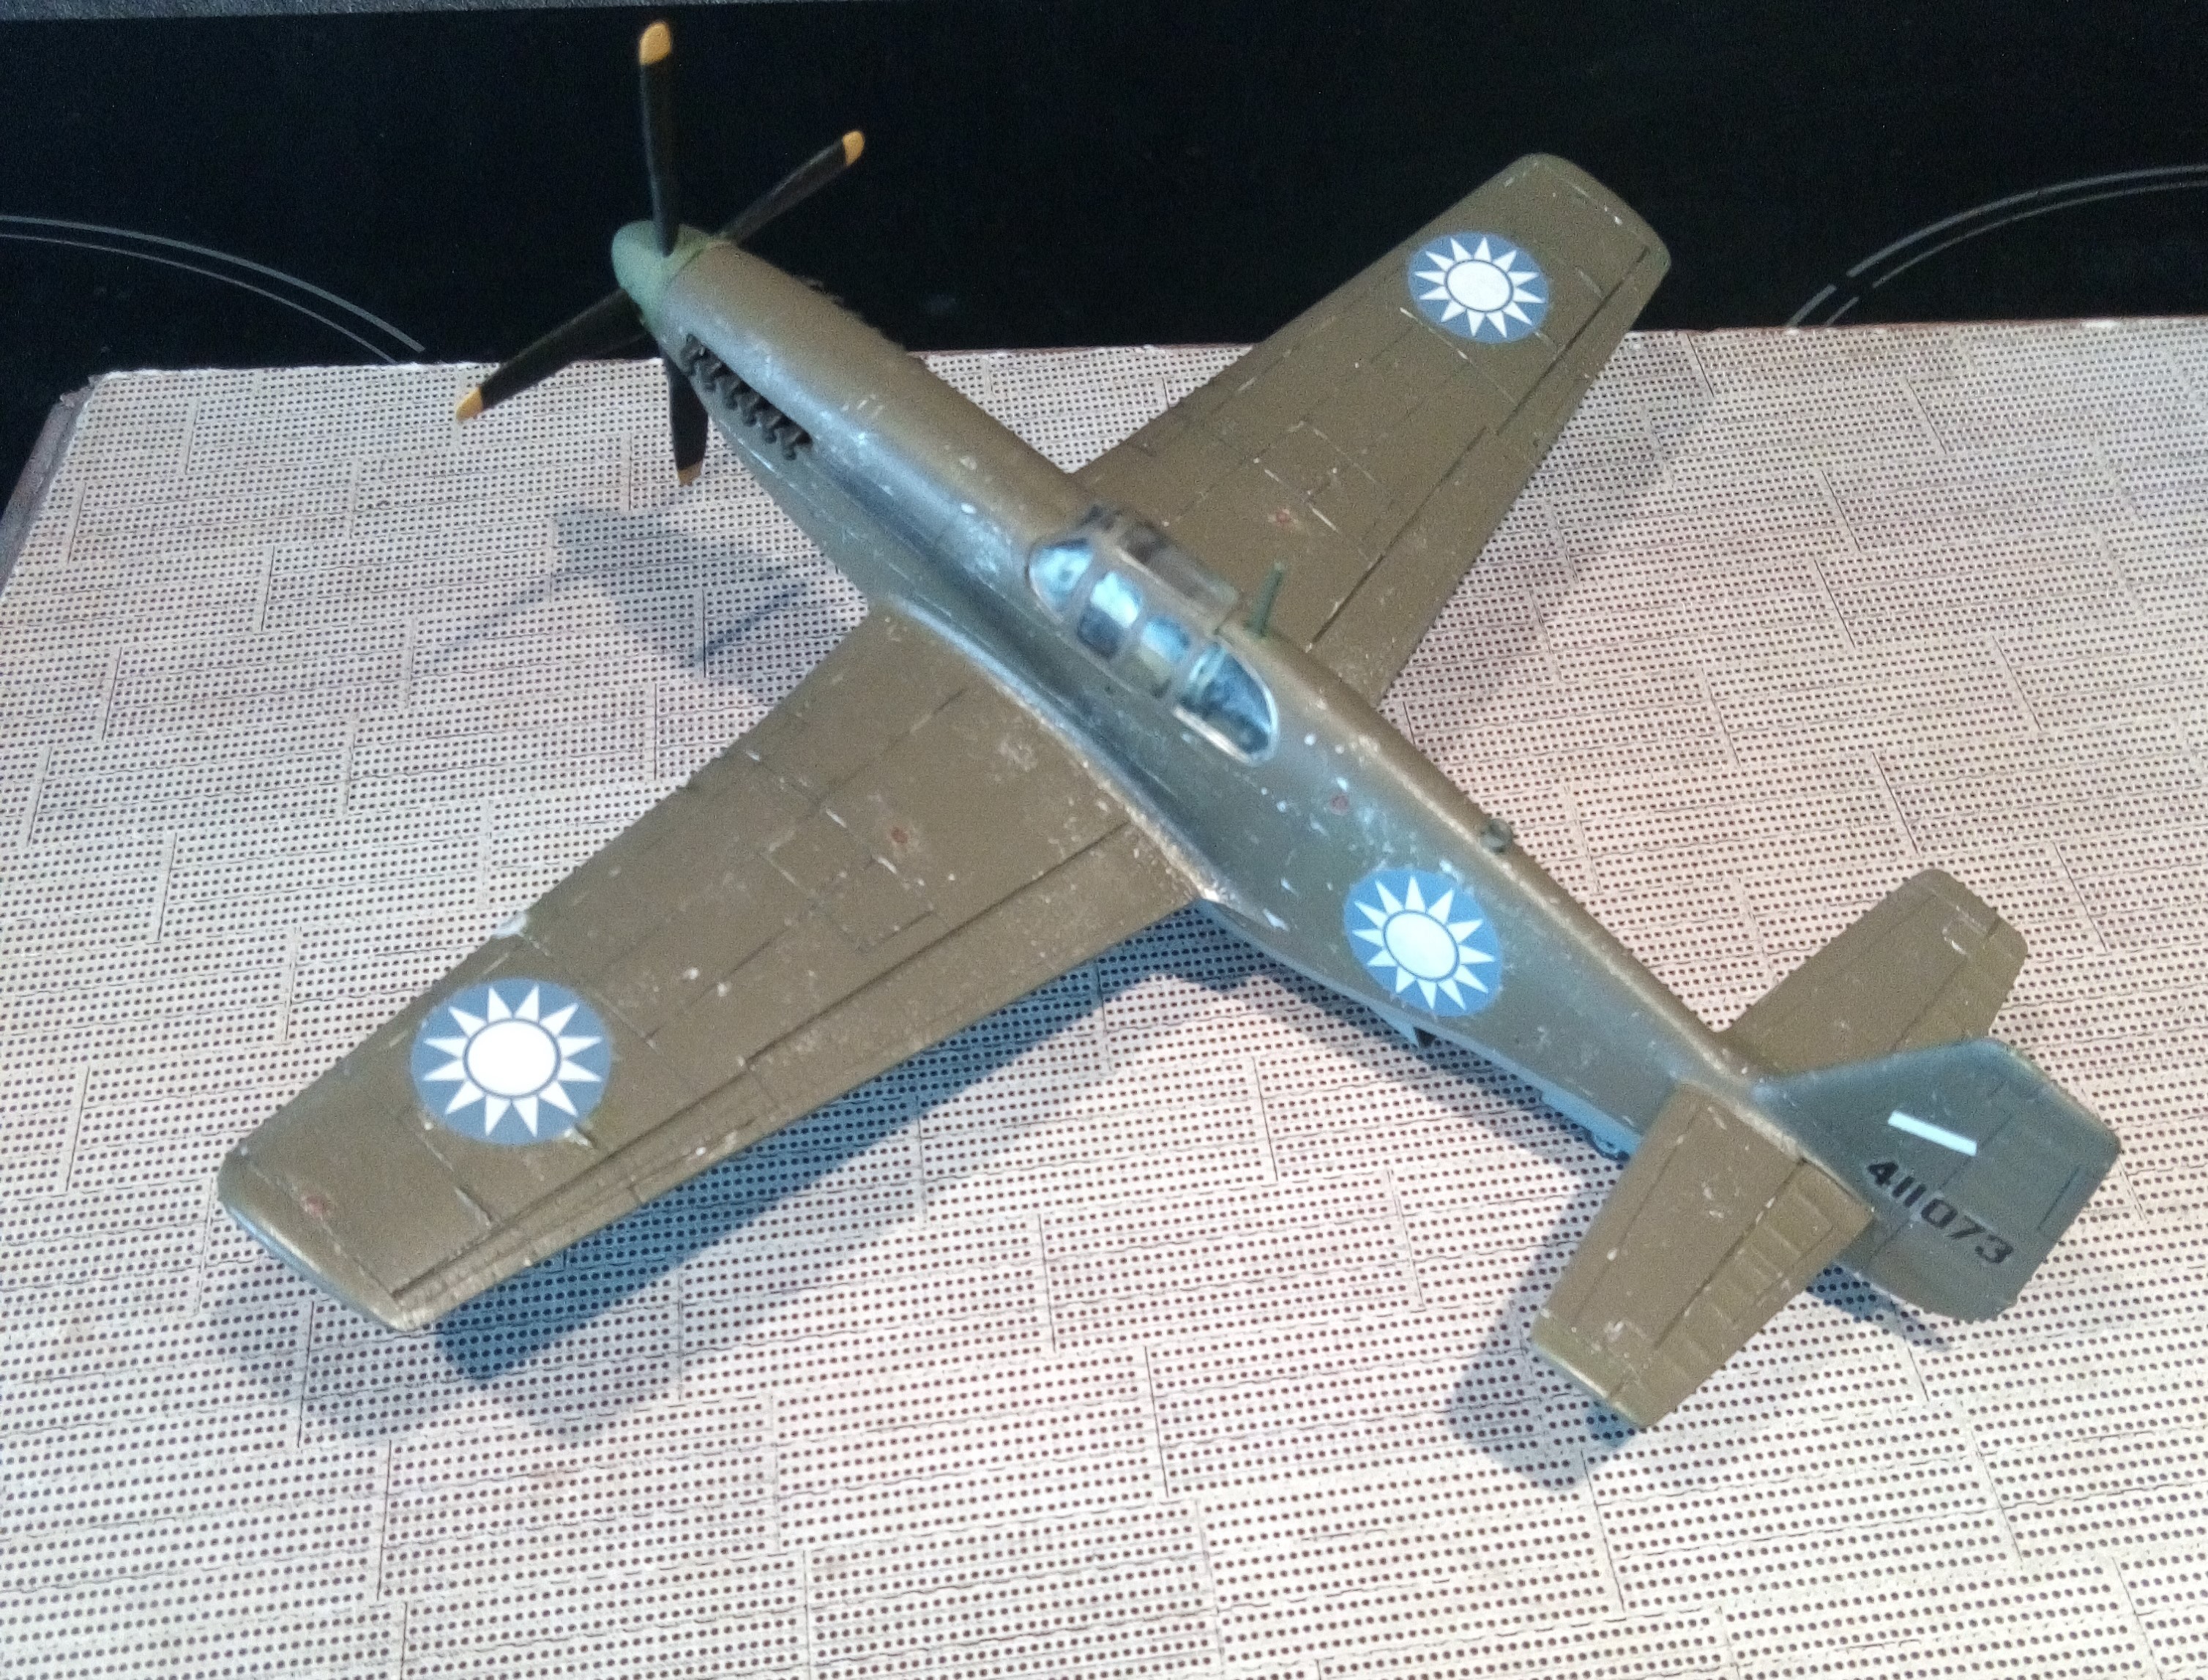 2021 Avril P51C Mustang Chinois 1/72 Revell